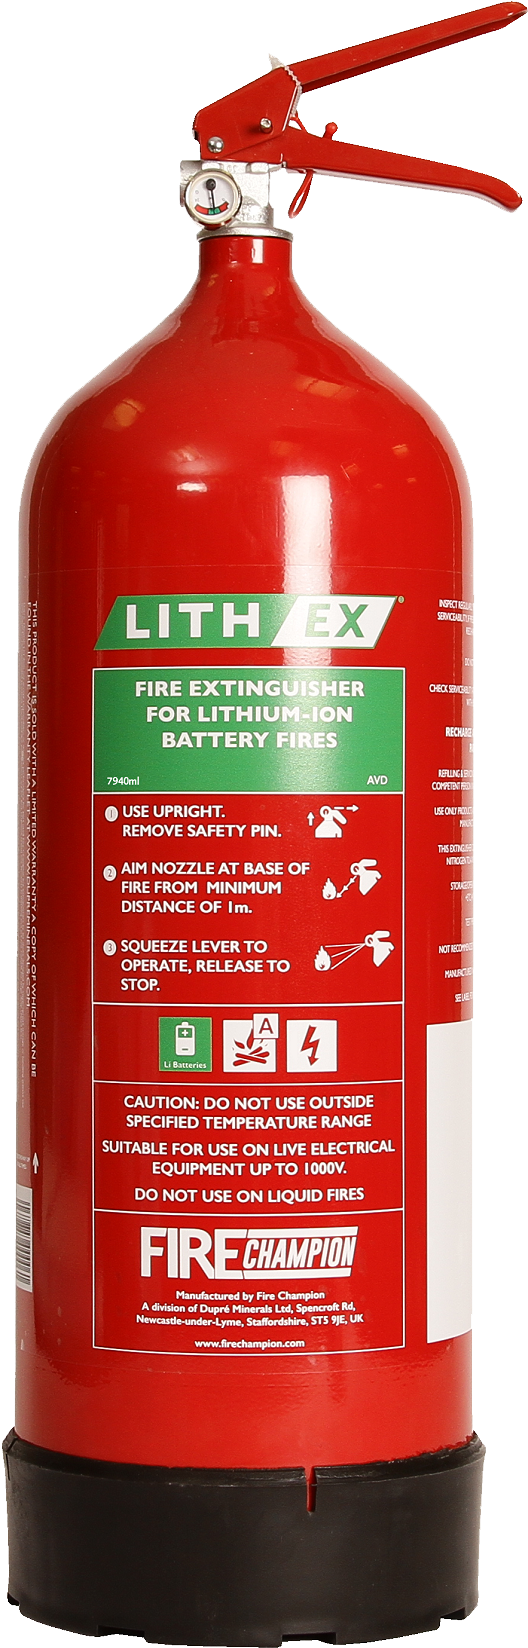 Extinguishers - Lithium Battery Fire Extinguisher Lion Battery Fire (800x1826)